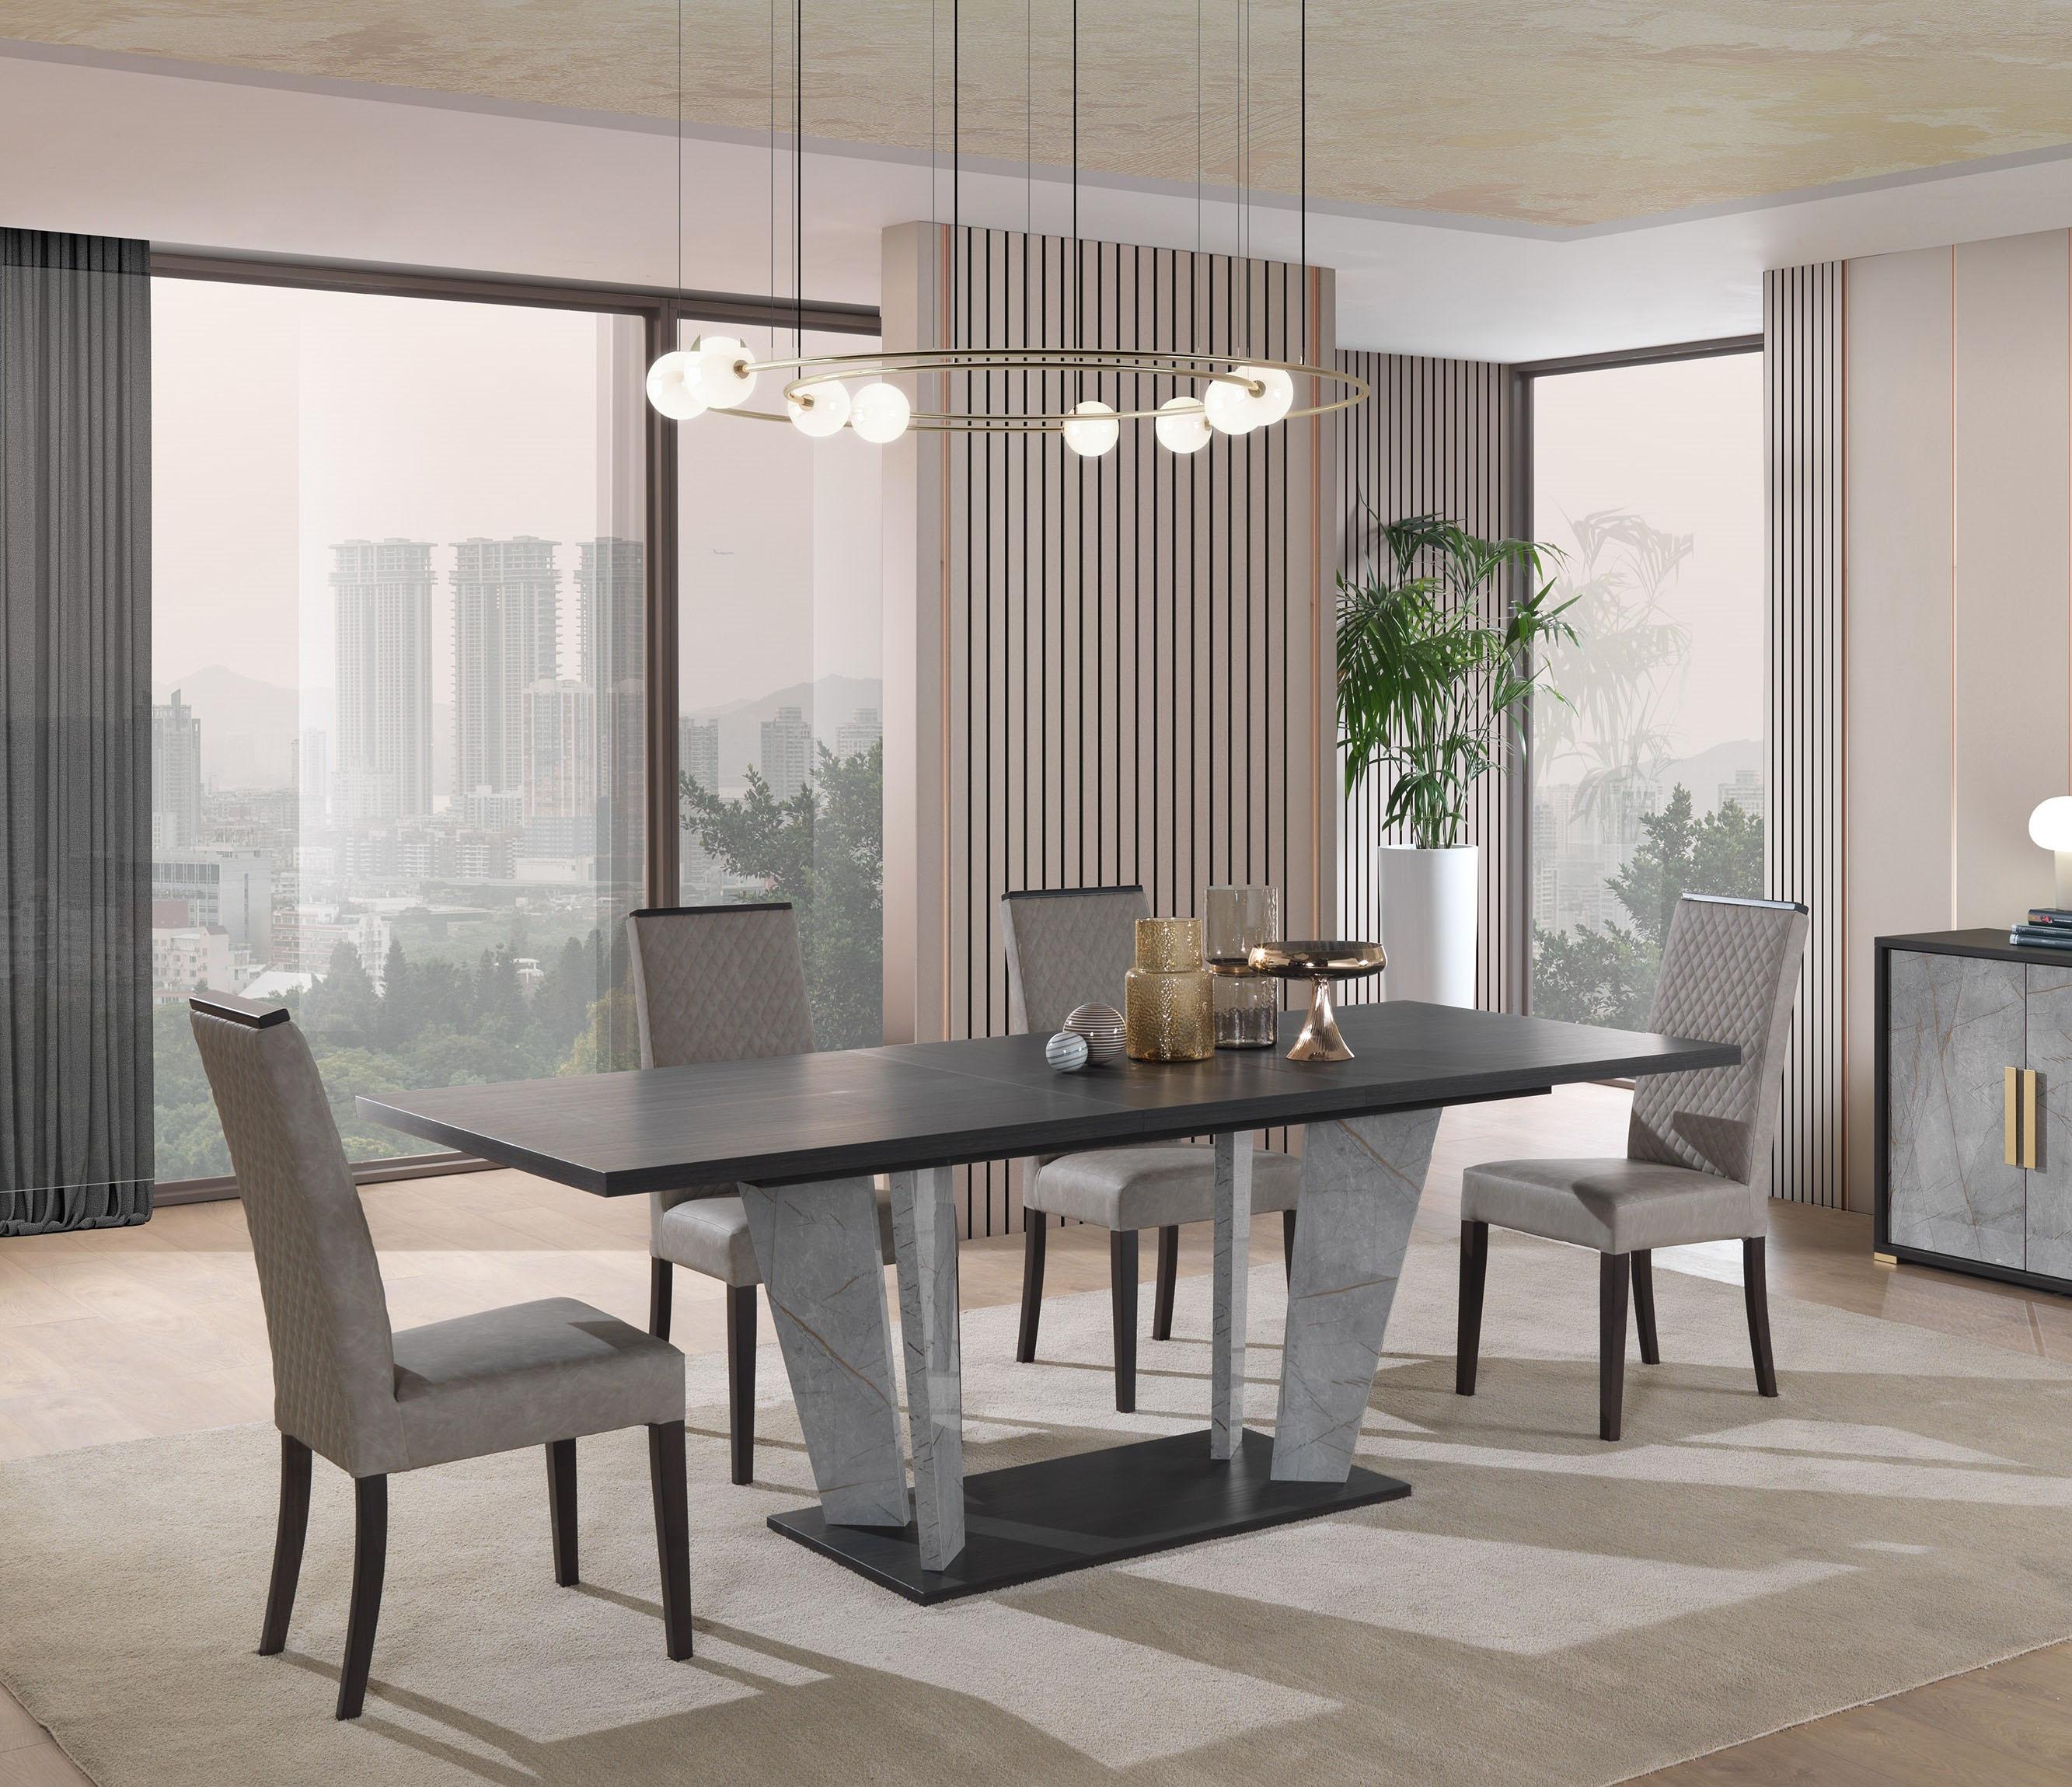 Contemporary, Modern Dining Set Travertine SKU18772-5PC in Wenge, Gray Eco Leather